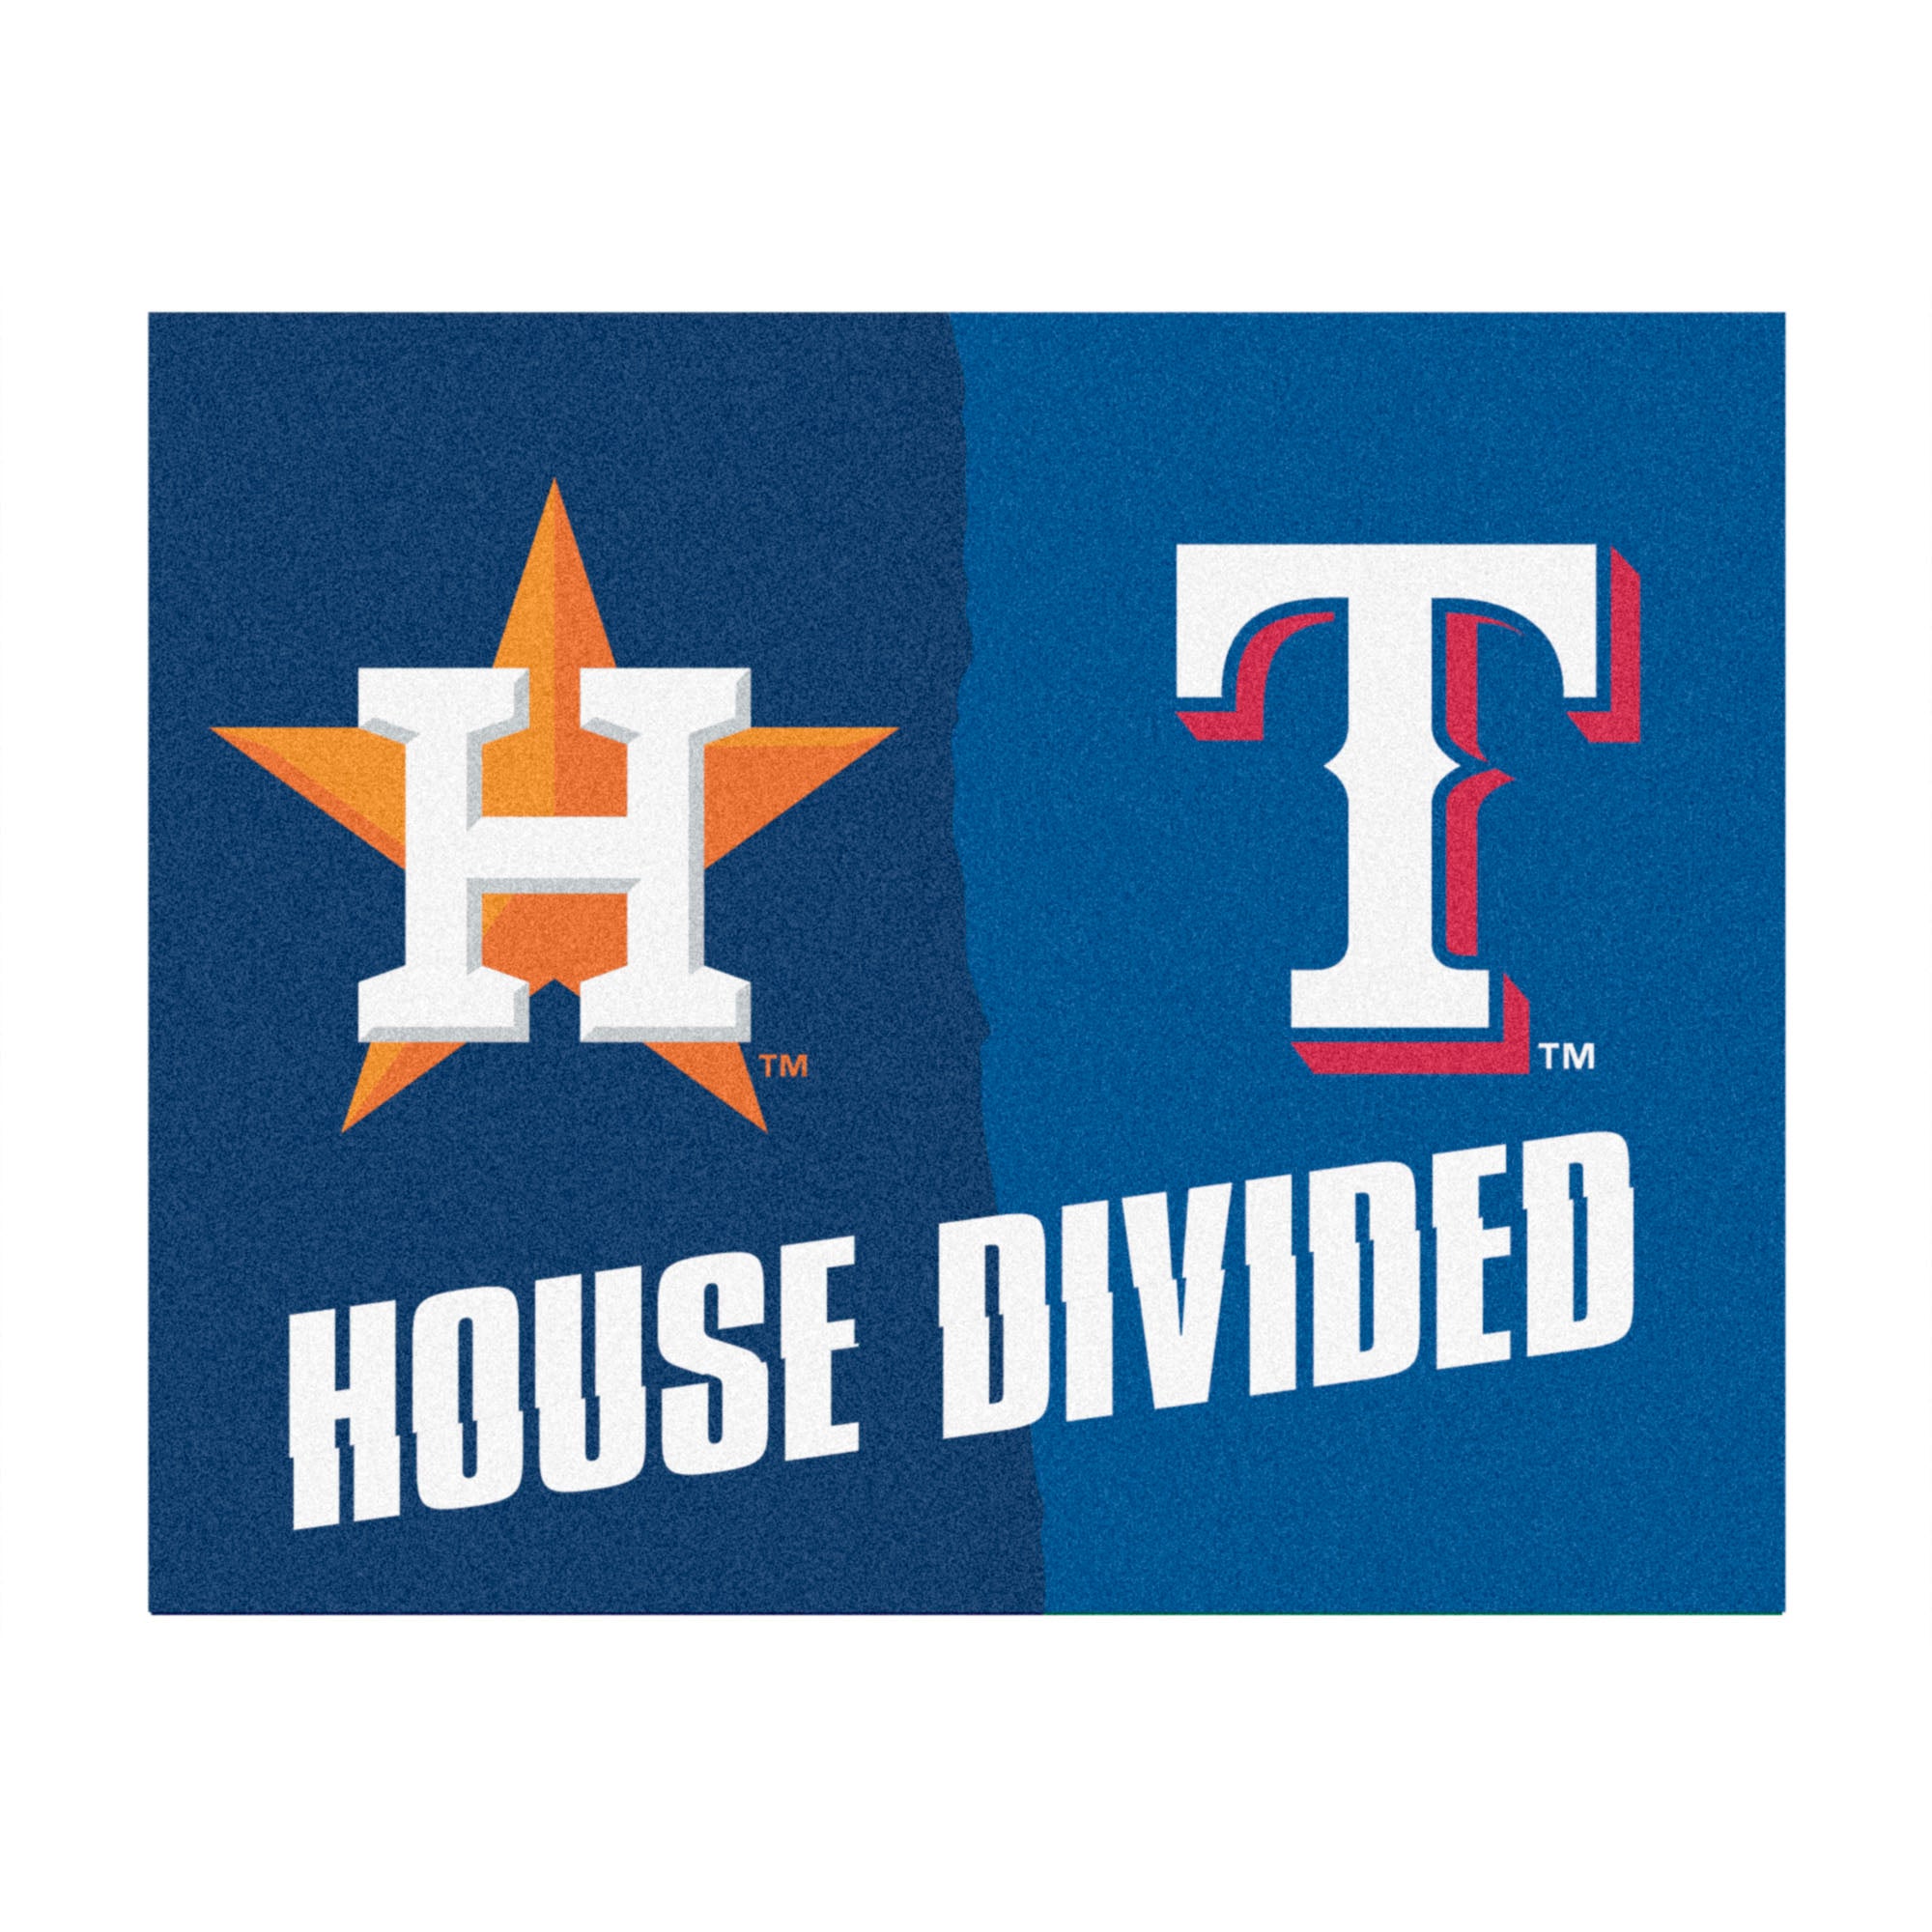 FANMATS, MLB House Divided - Astros / Rangers House Divided Rug